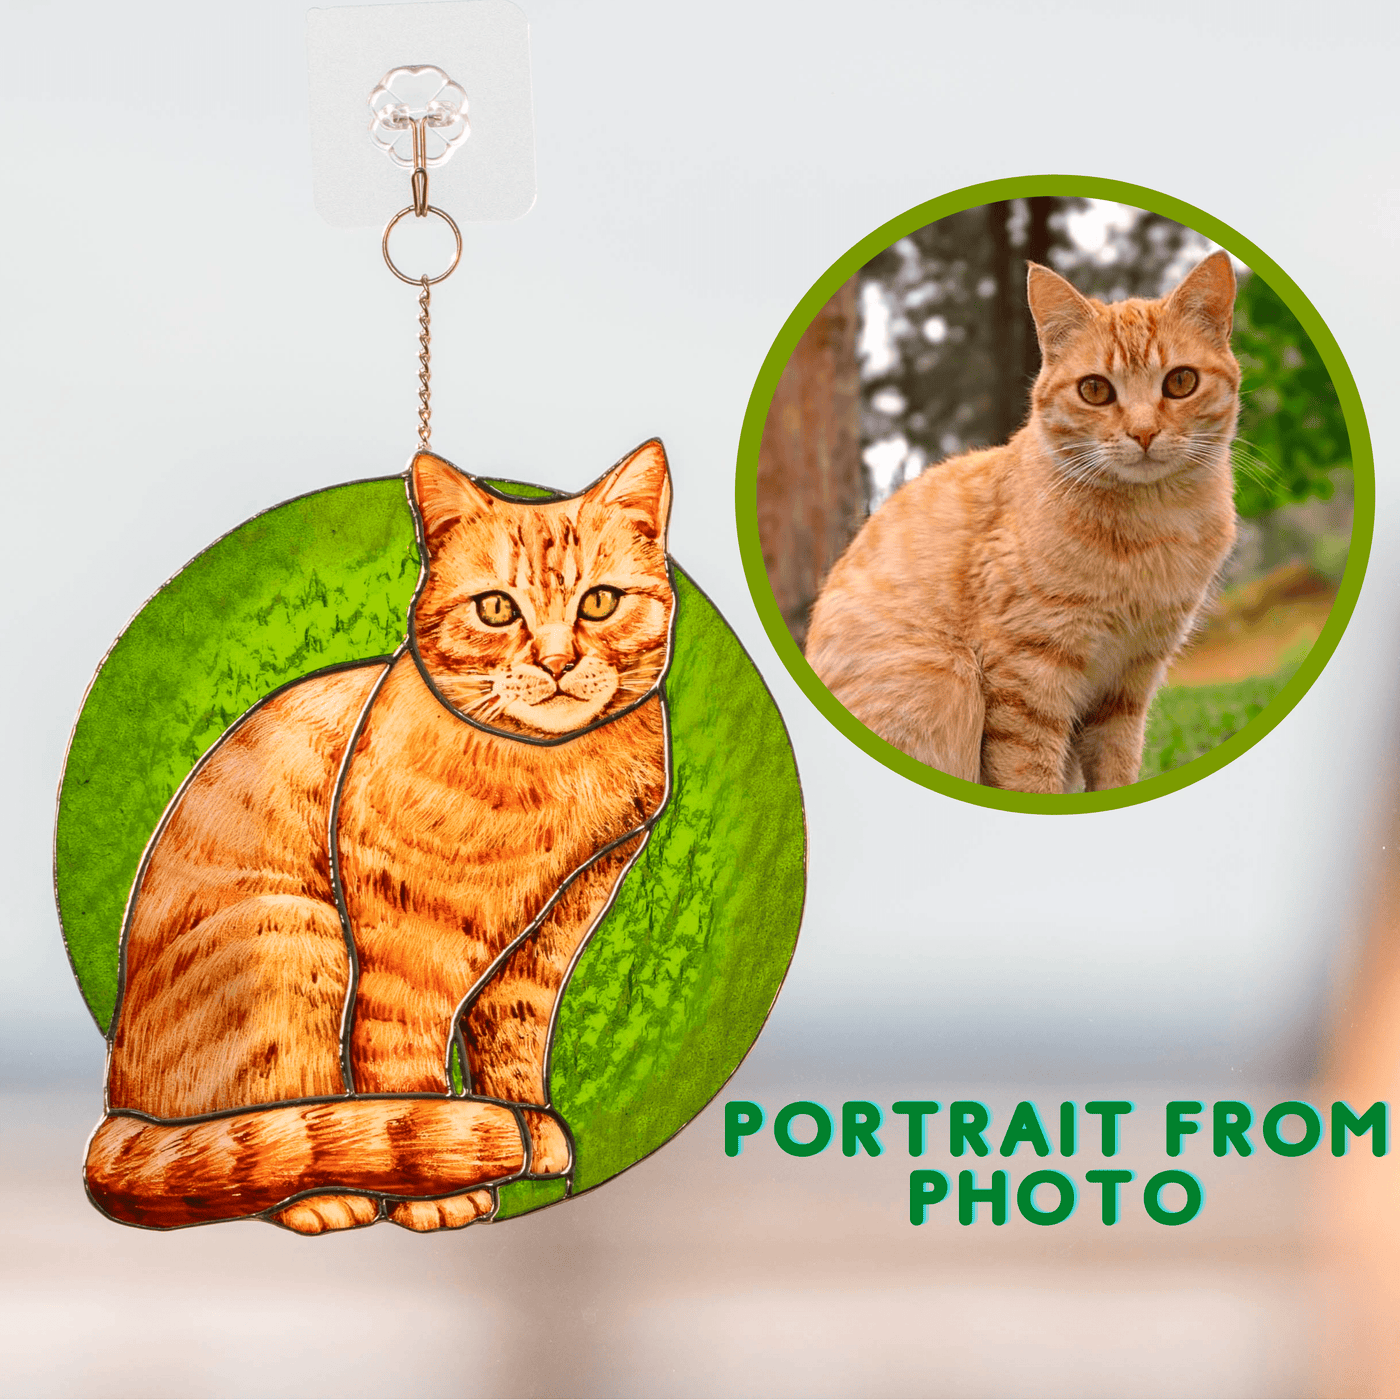 Hand-painted stained glass portrait of a cat in comparison with the real pet photo